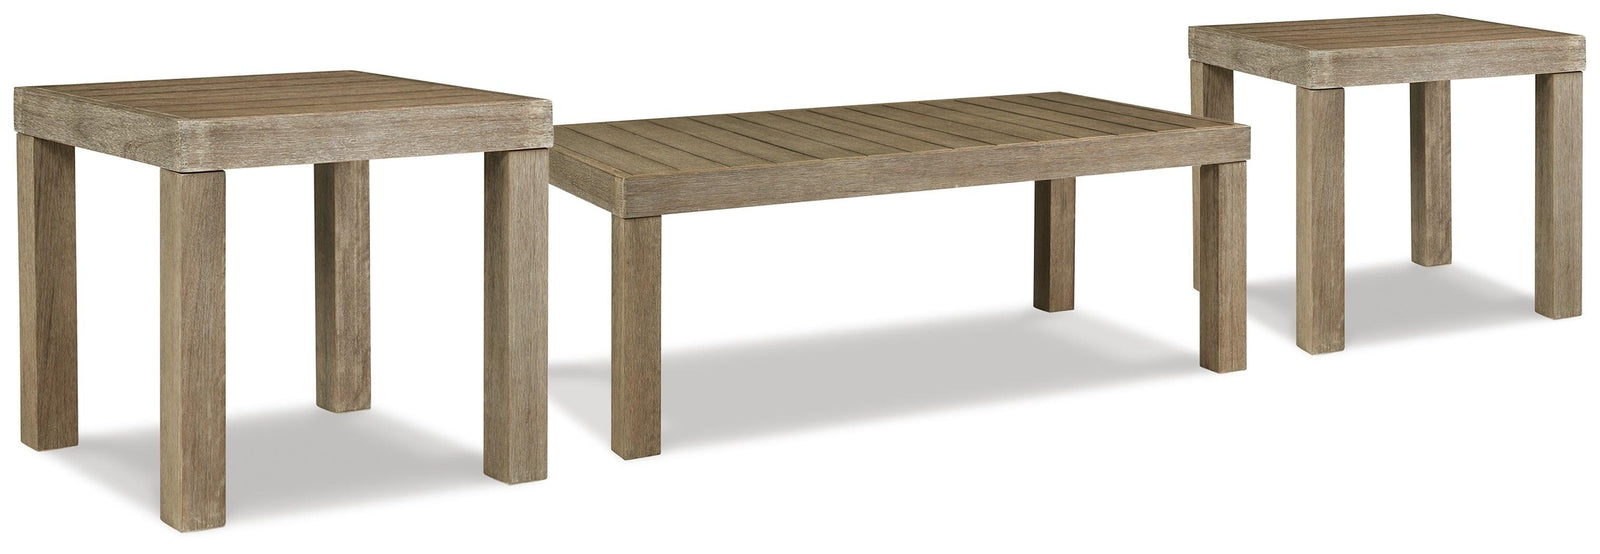 Silo Brown Point Outdoor Coffee Table With 2 End Tables - Ella Furniture